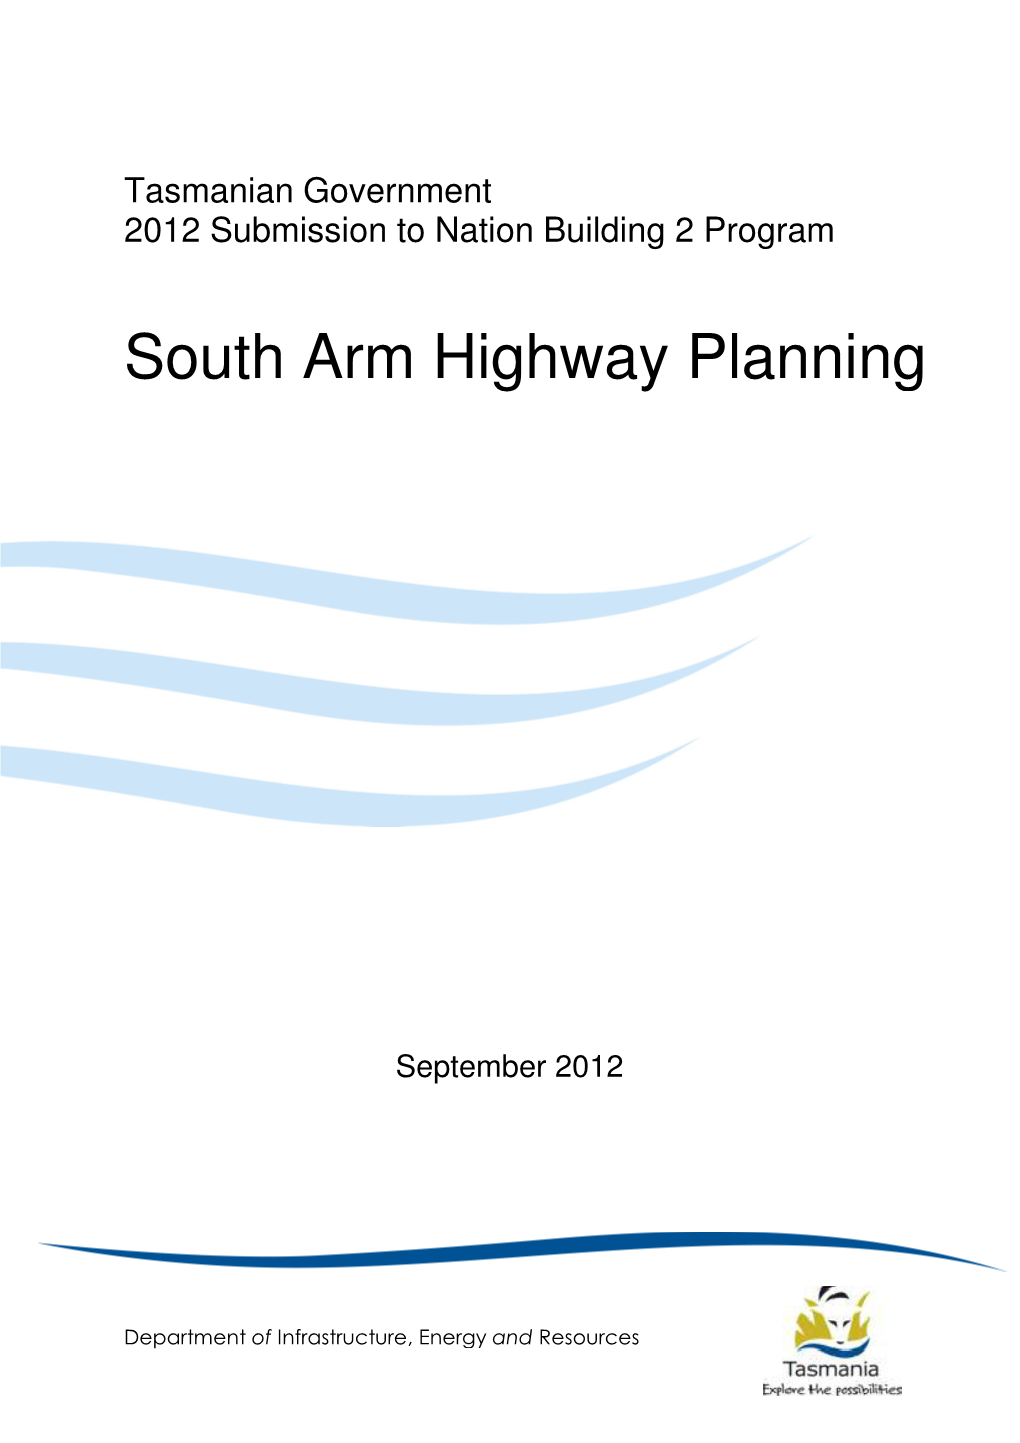 South Arm South Arm Highway Planning Planning